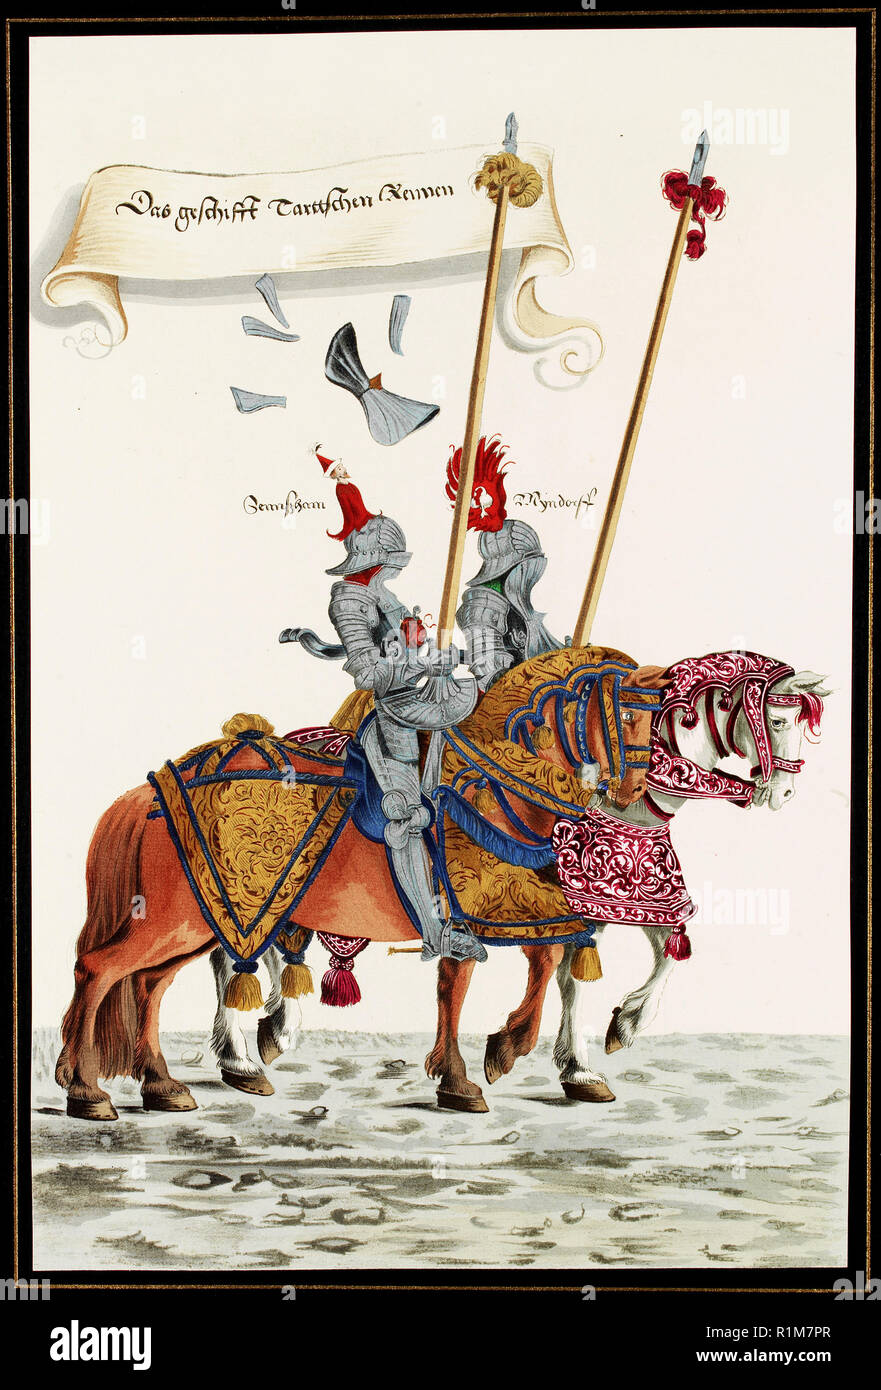 13th Century Knights with Lances 2